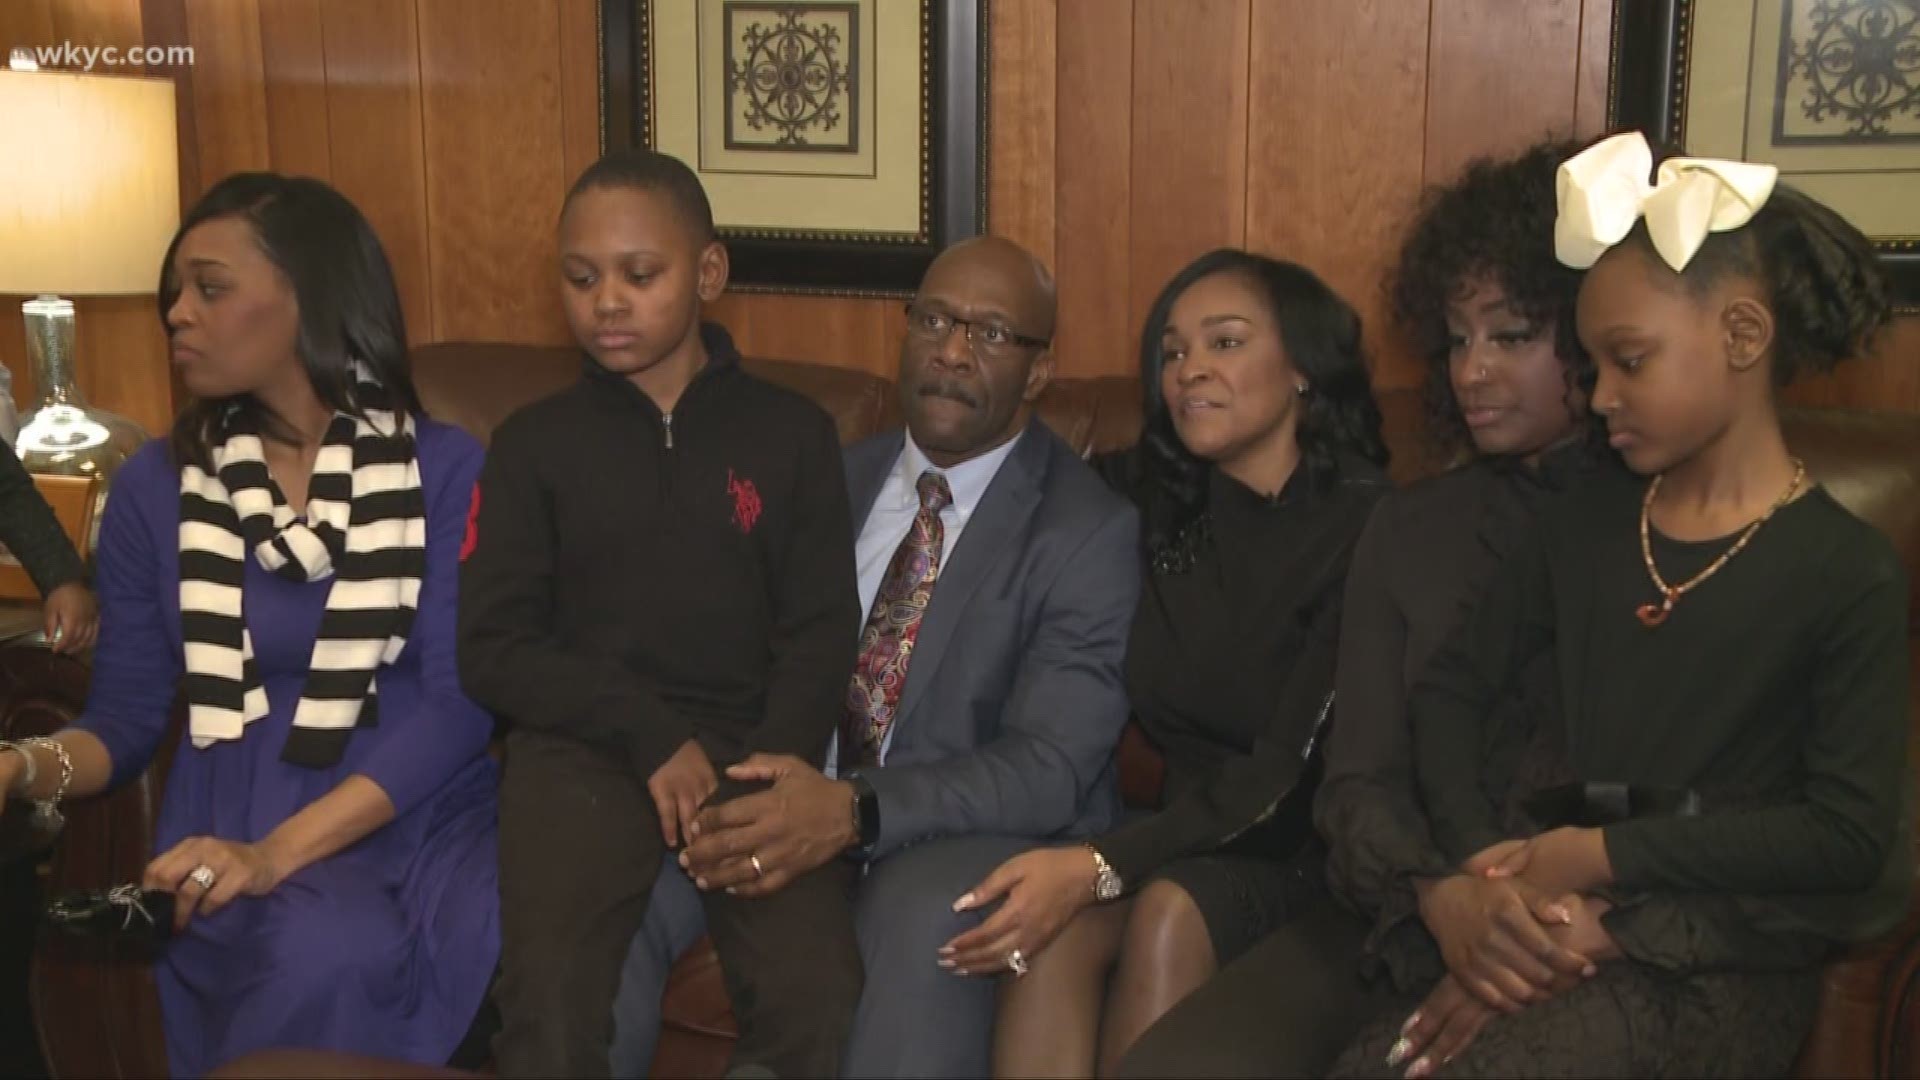 The family of Stephen Halton Jr. is still seeking answers, five years after his murder.